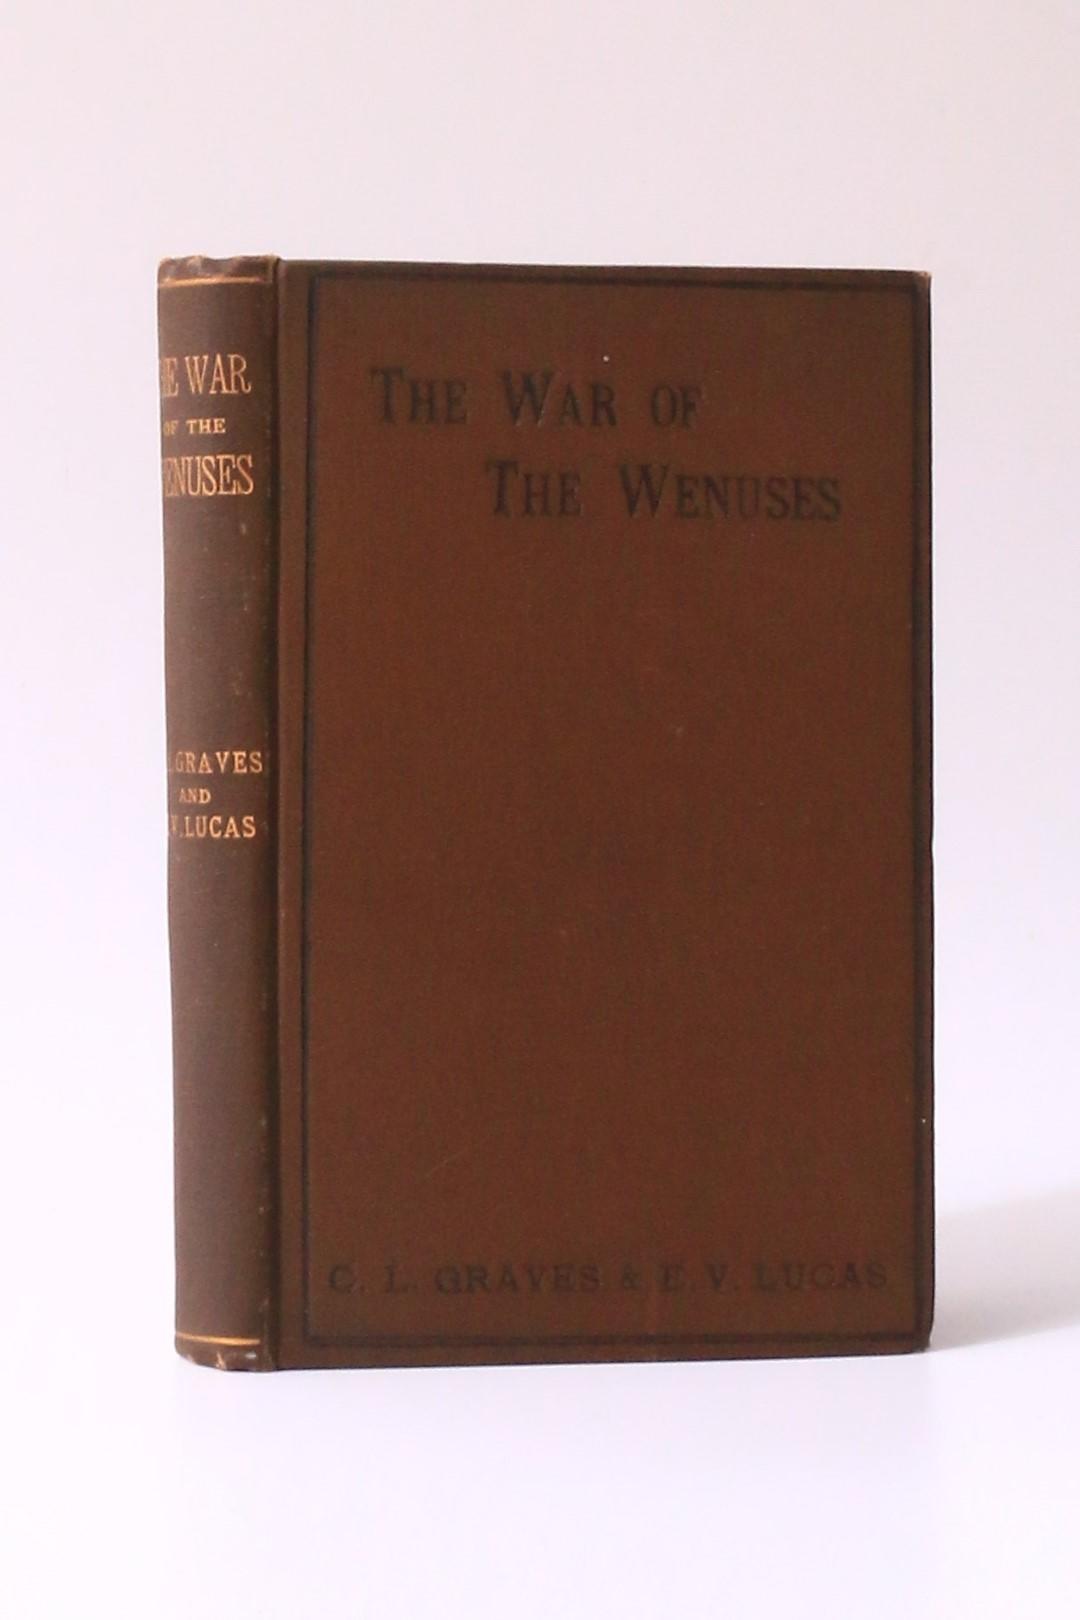 C.L. Graves & E.V. Lucas - The War of the Wenuses - Arrowsmith, 1898, First Edition.